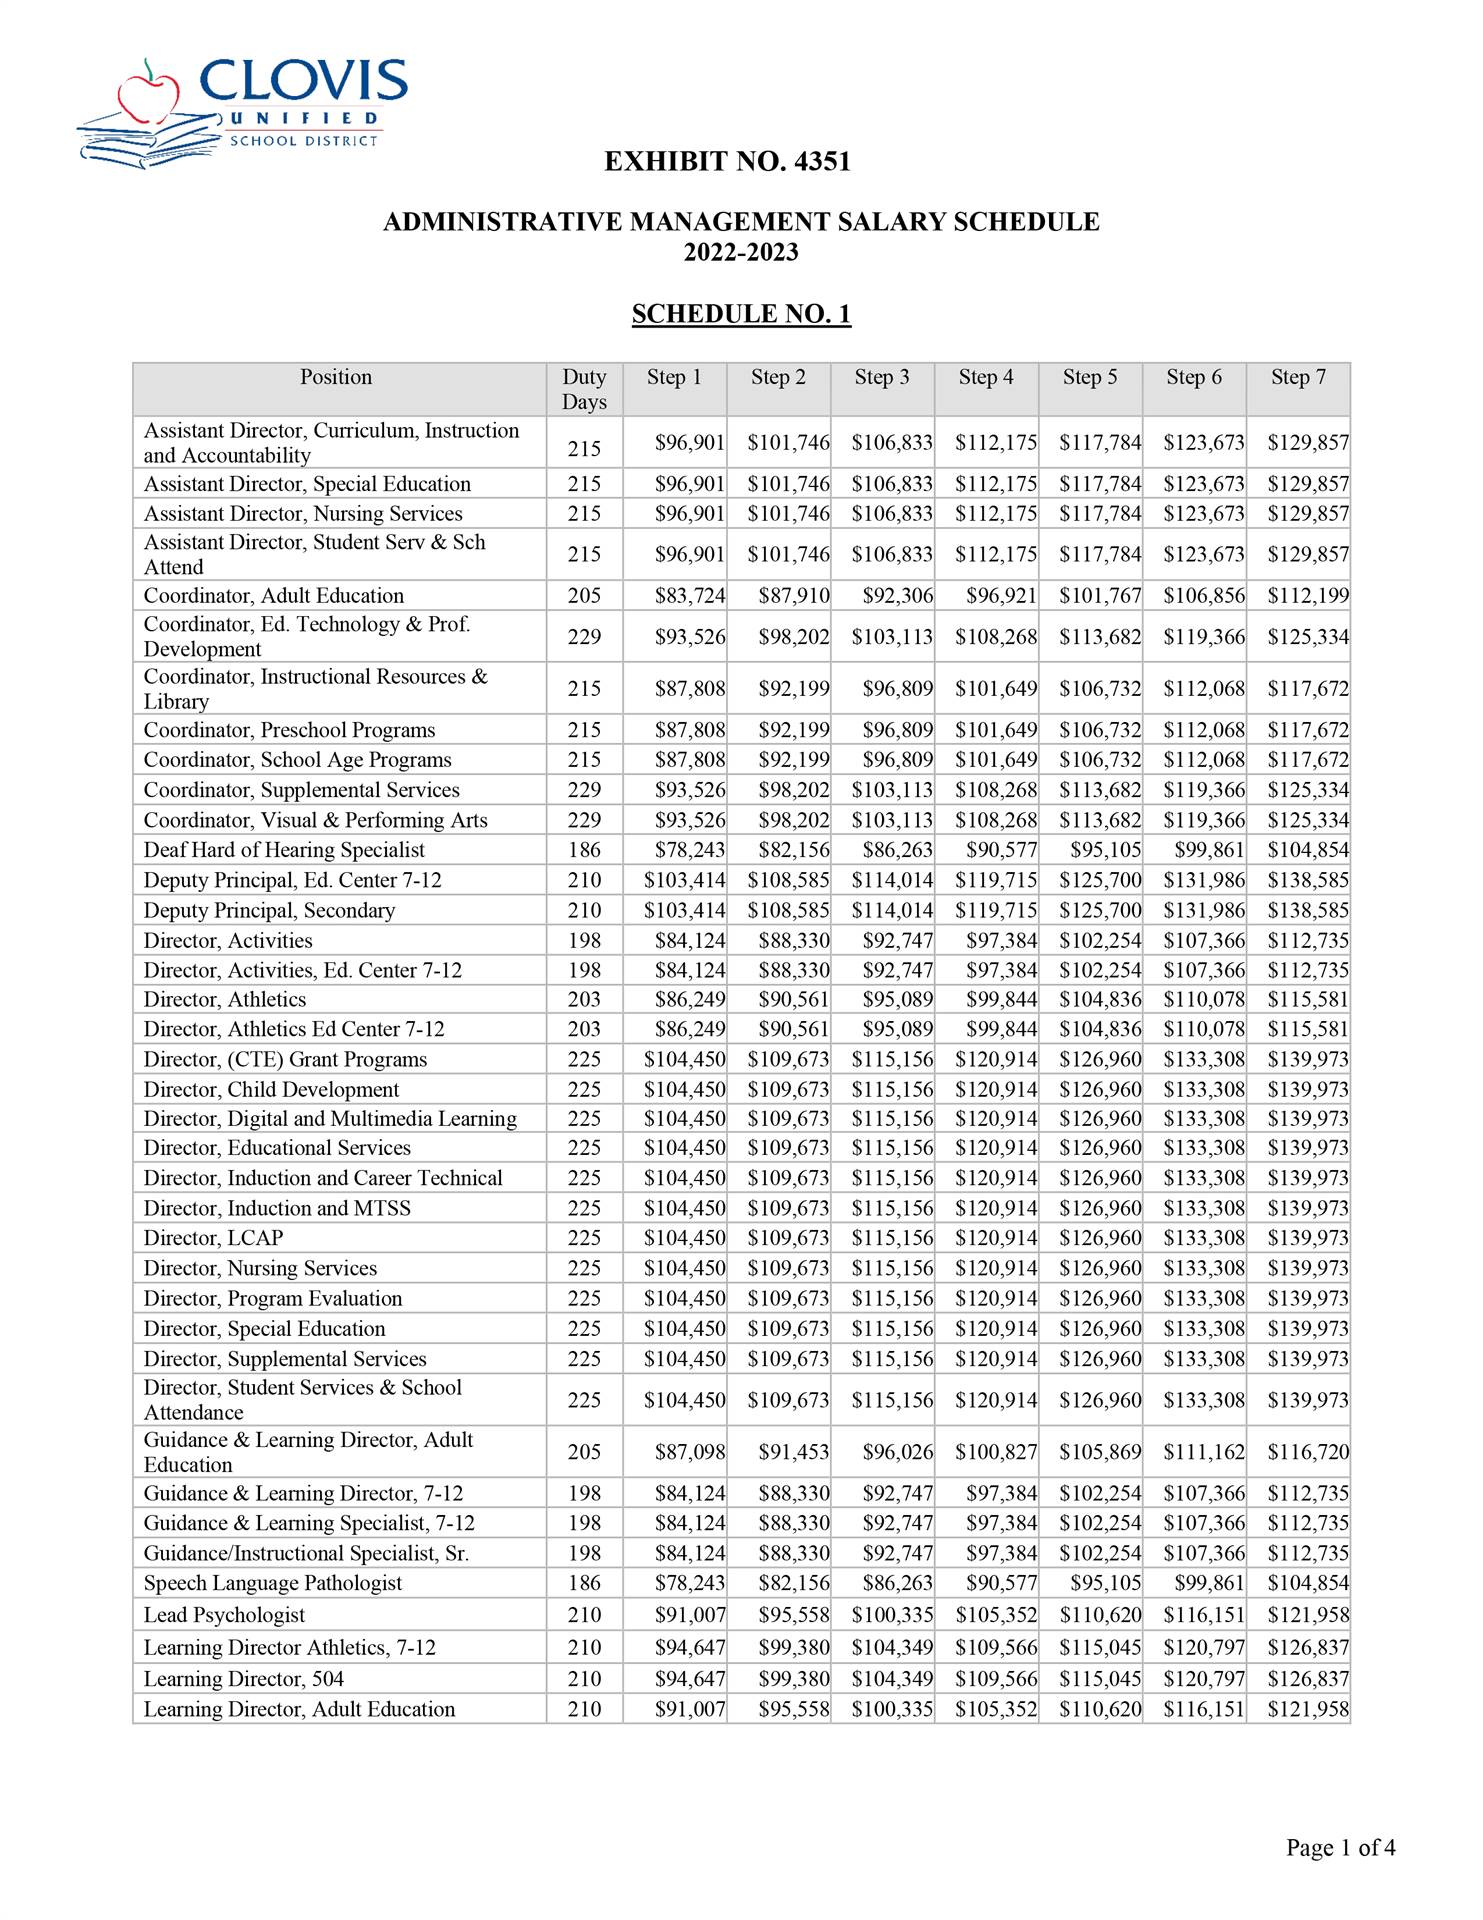 Certificated Management Salary Schedule 2